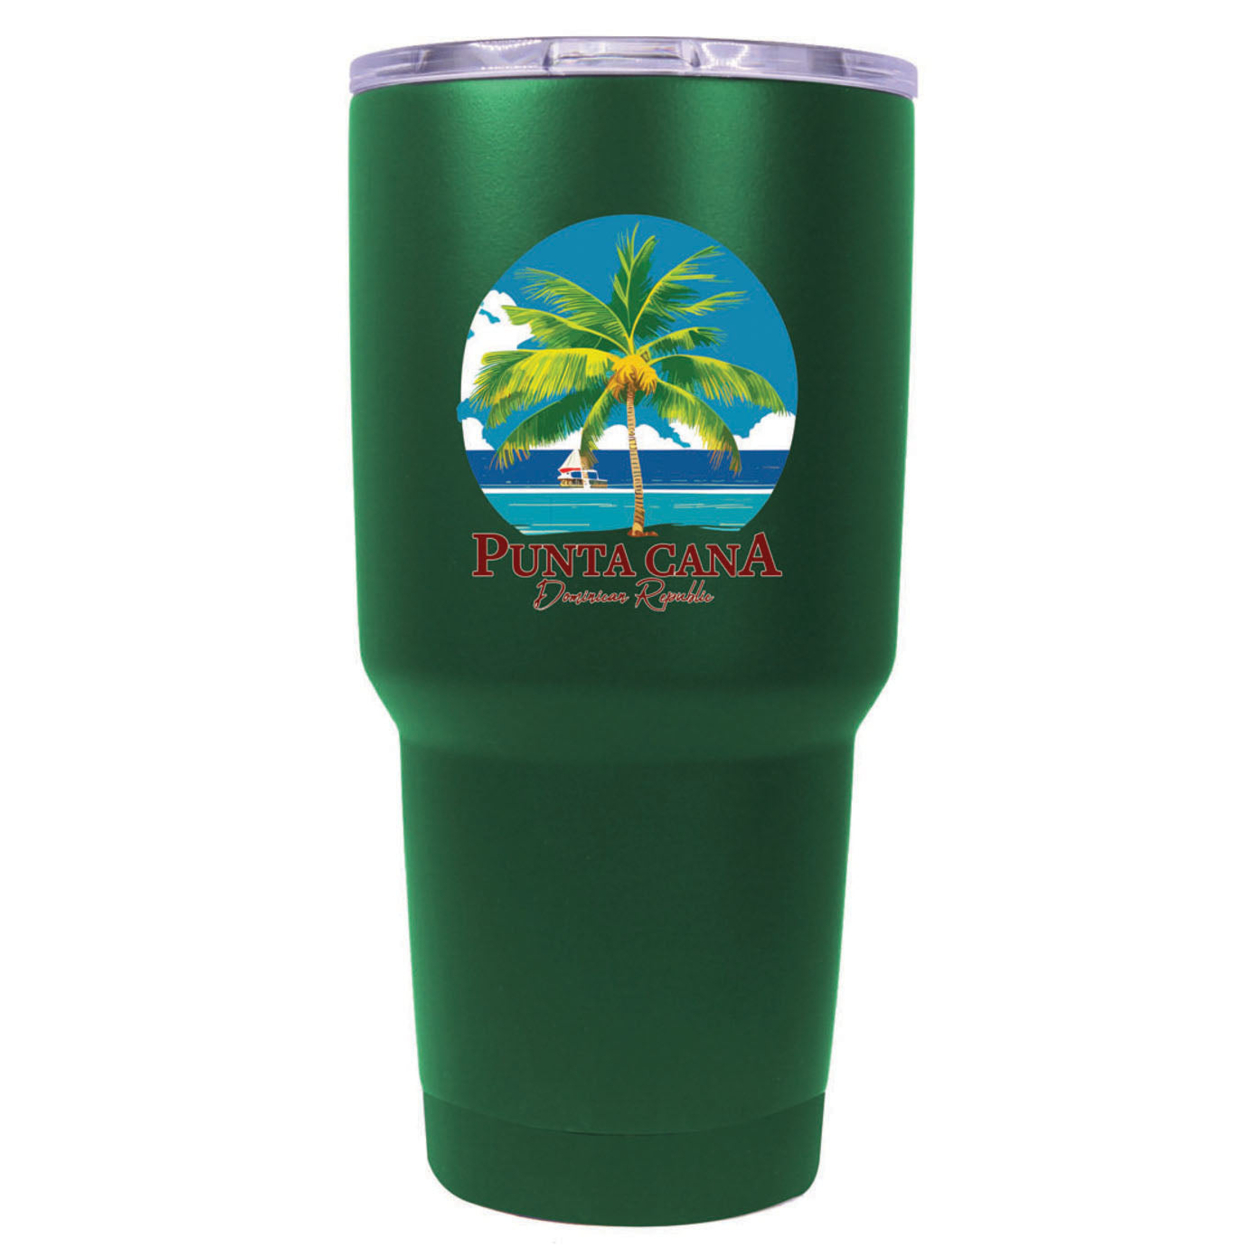 Punta Cana Dominican Republic Souvenir 24 Oz Insulated Stainless Steel Tumbler - Red, PARROT B